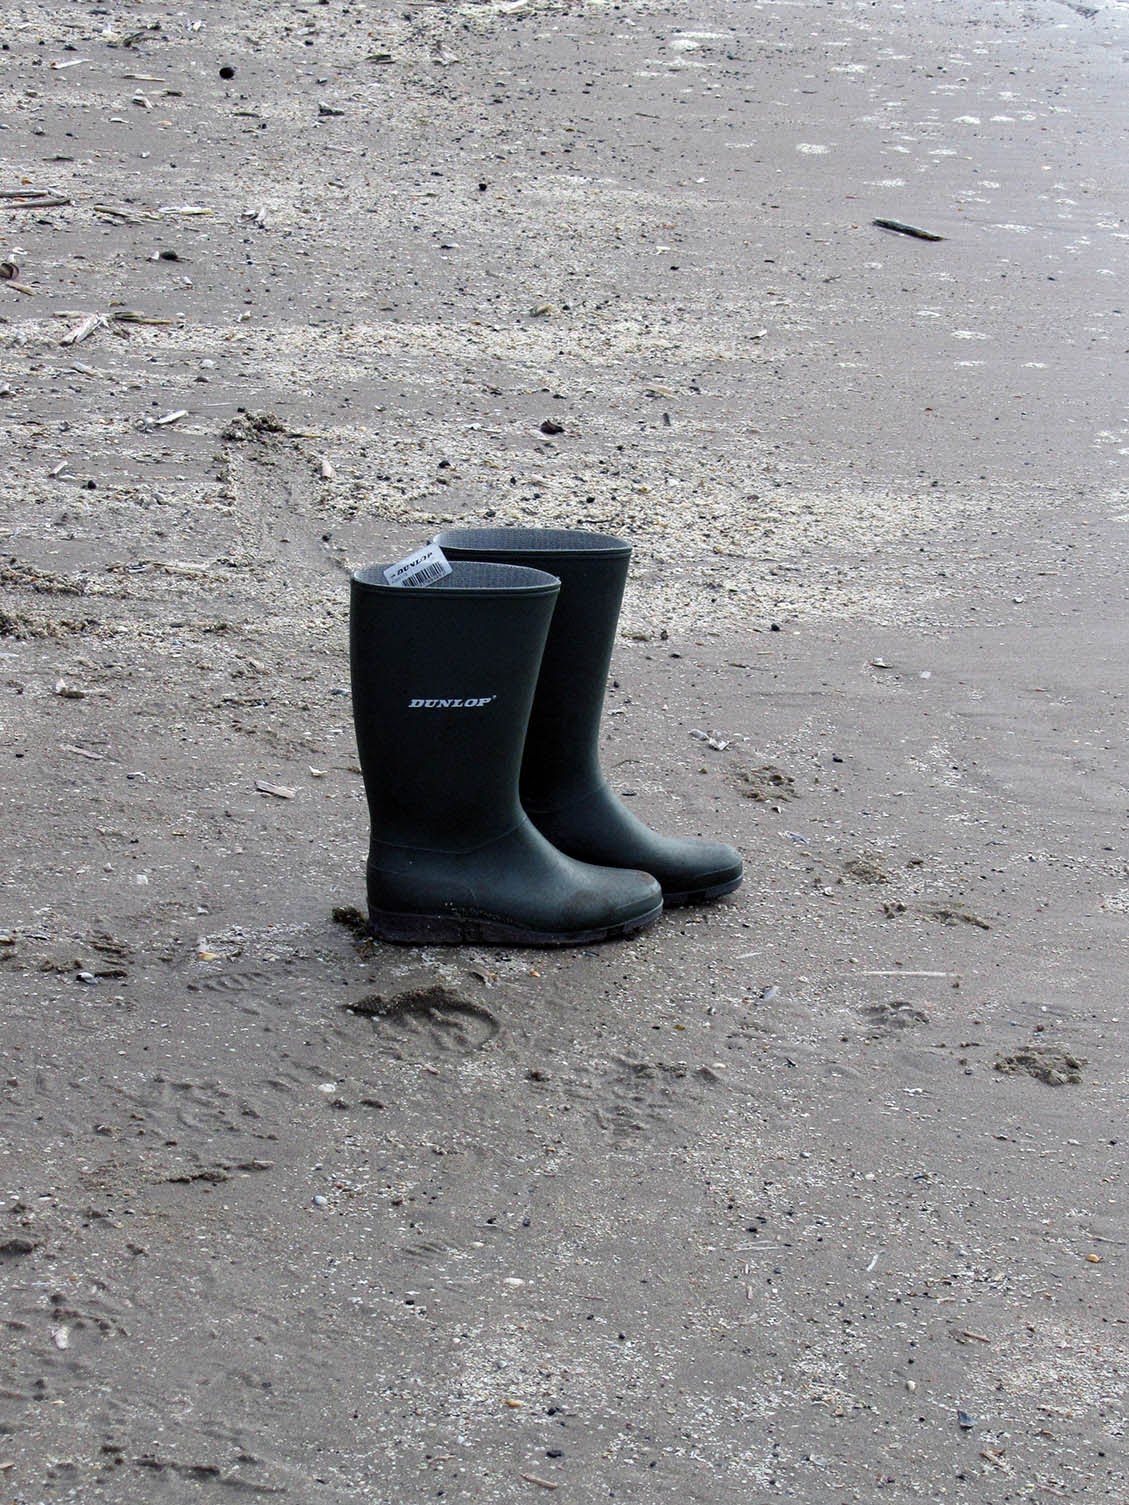 simplicity: two boots on the beach